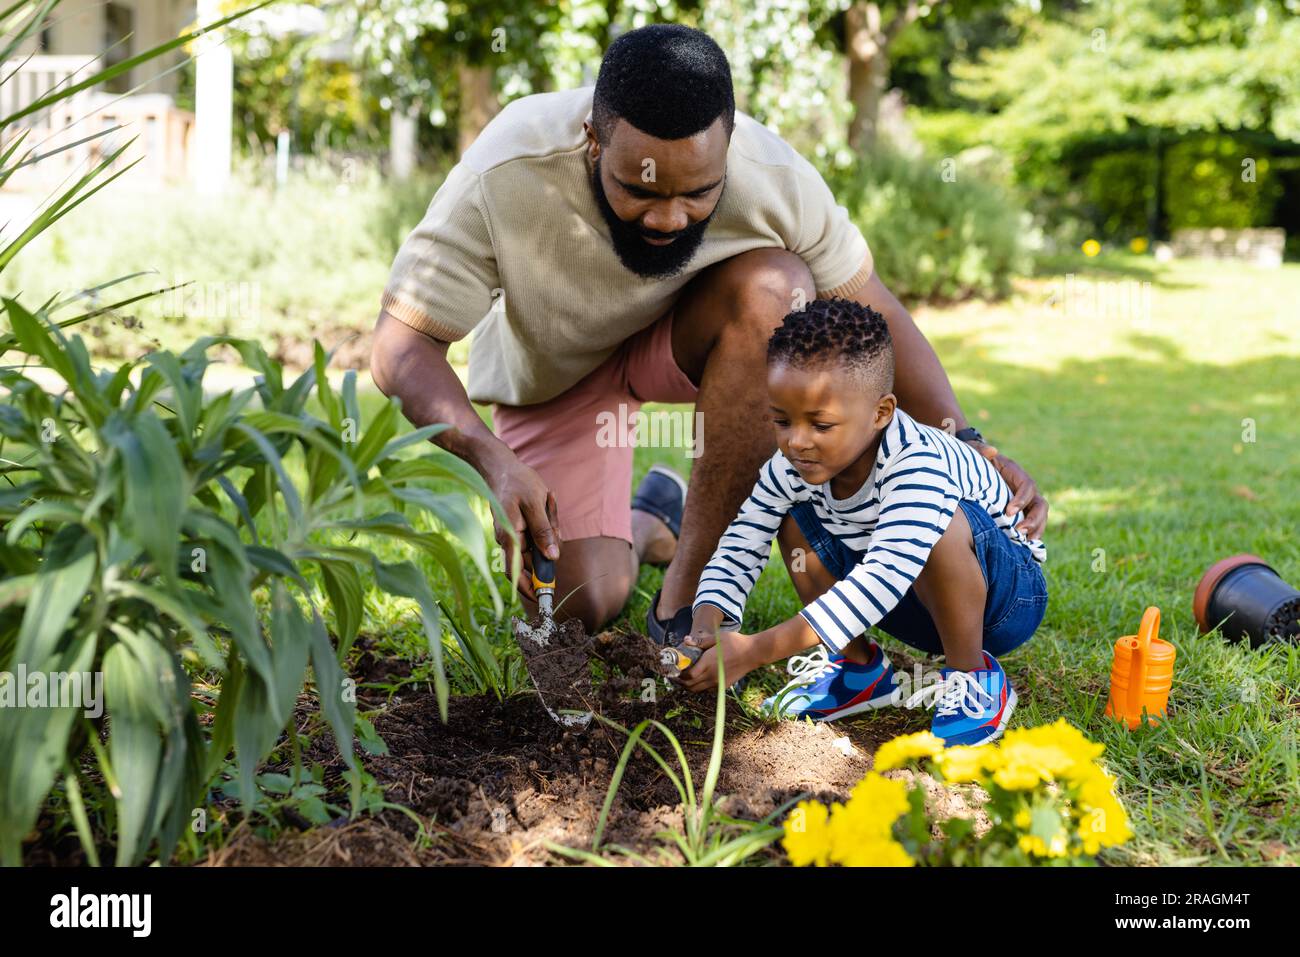 African american father assisting son in digging dirt with tools on grassy field in backyard Stock Photo